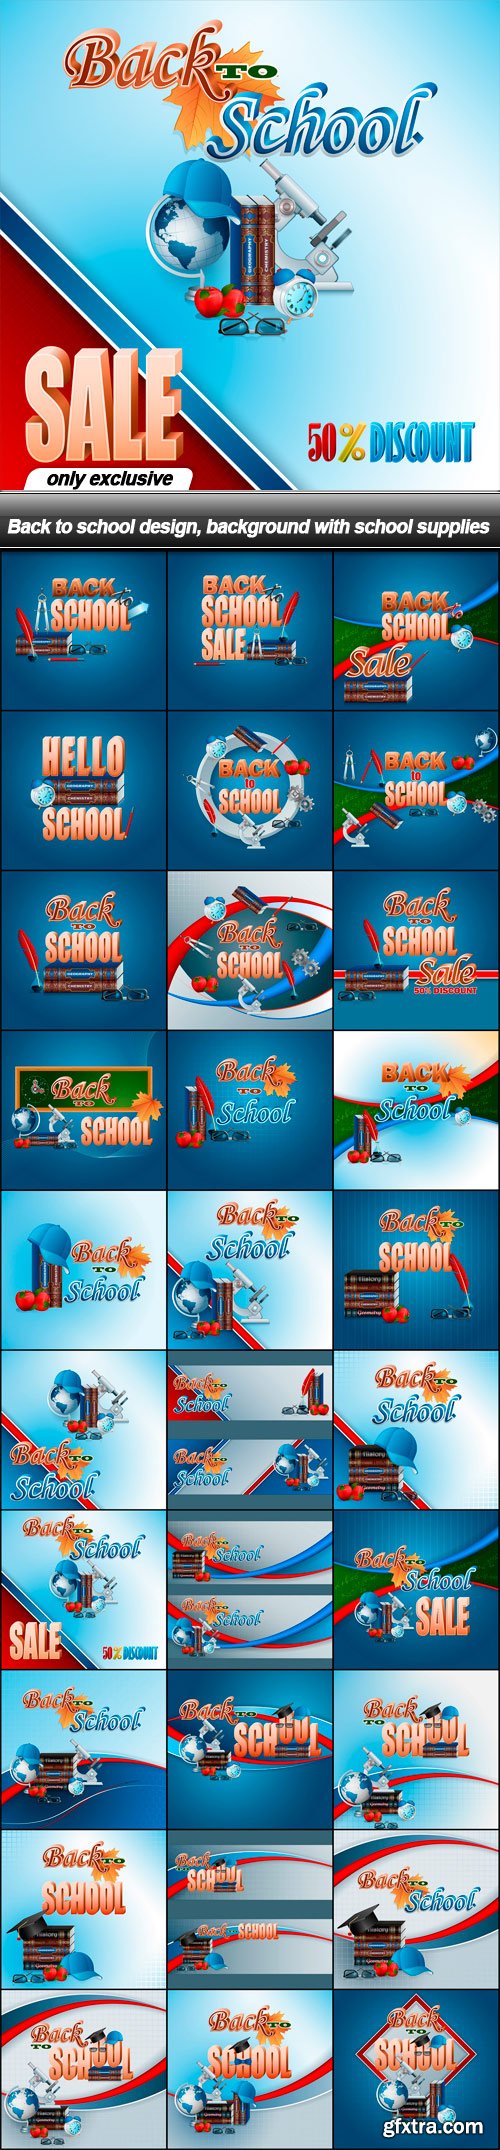 Back to school design, background with school supplies - 30 EPS